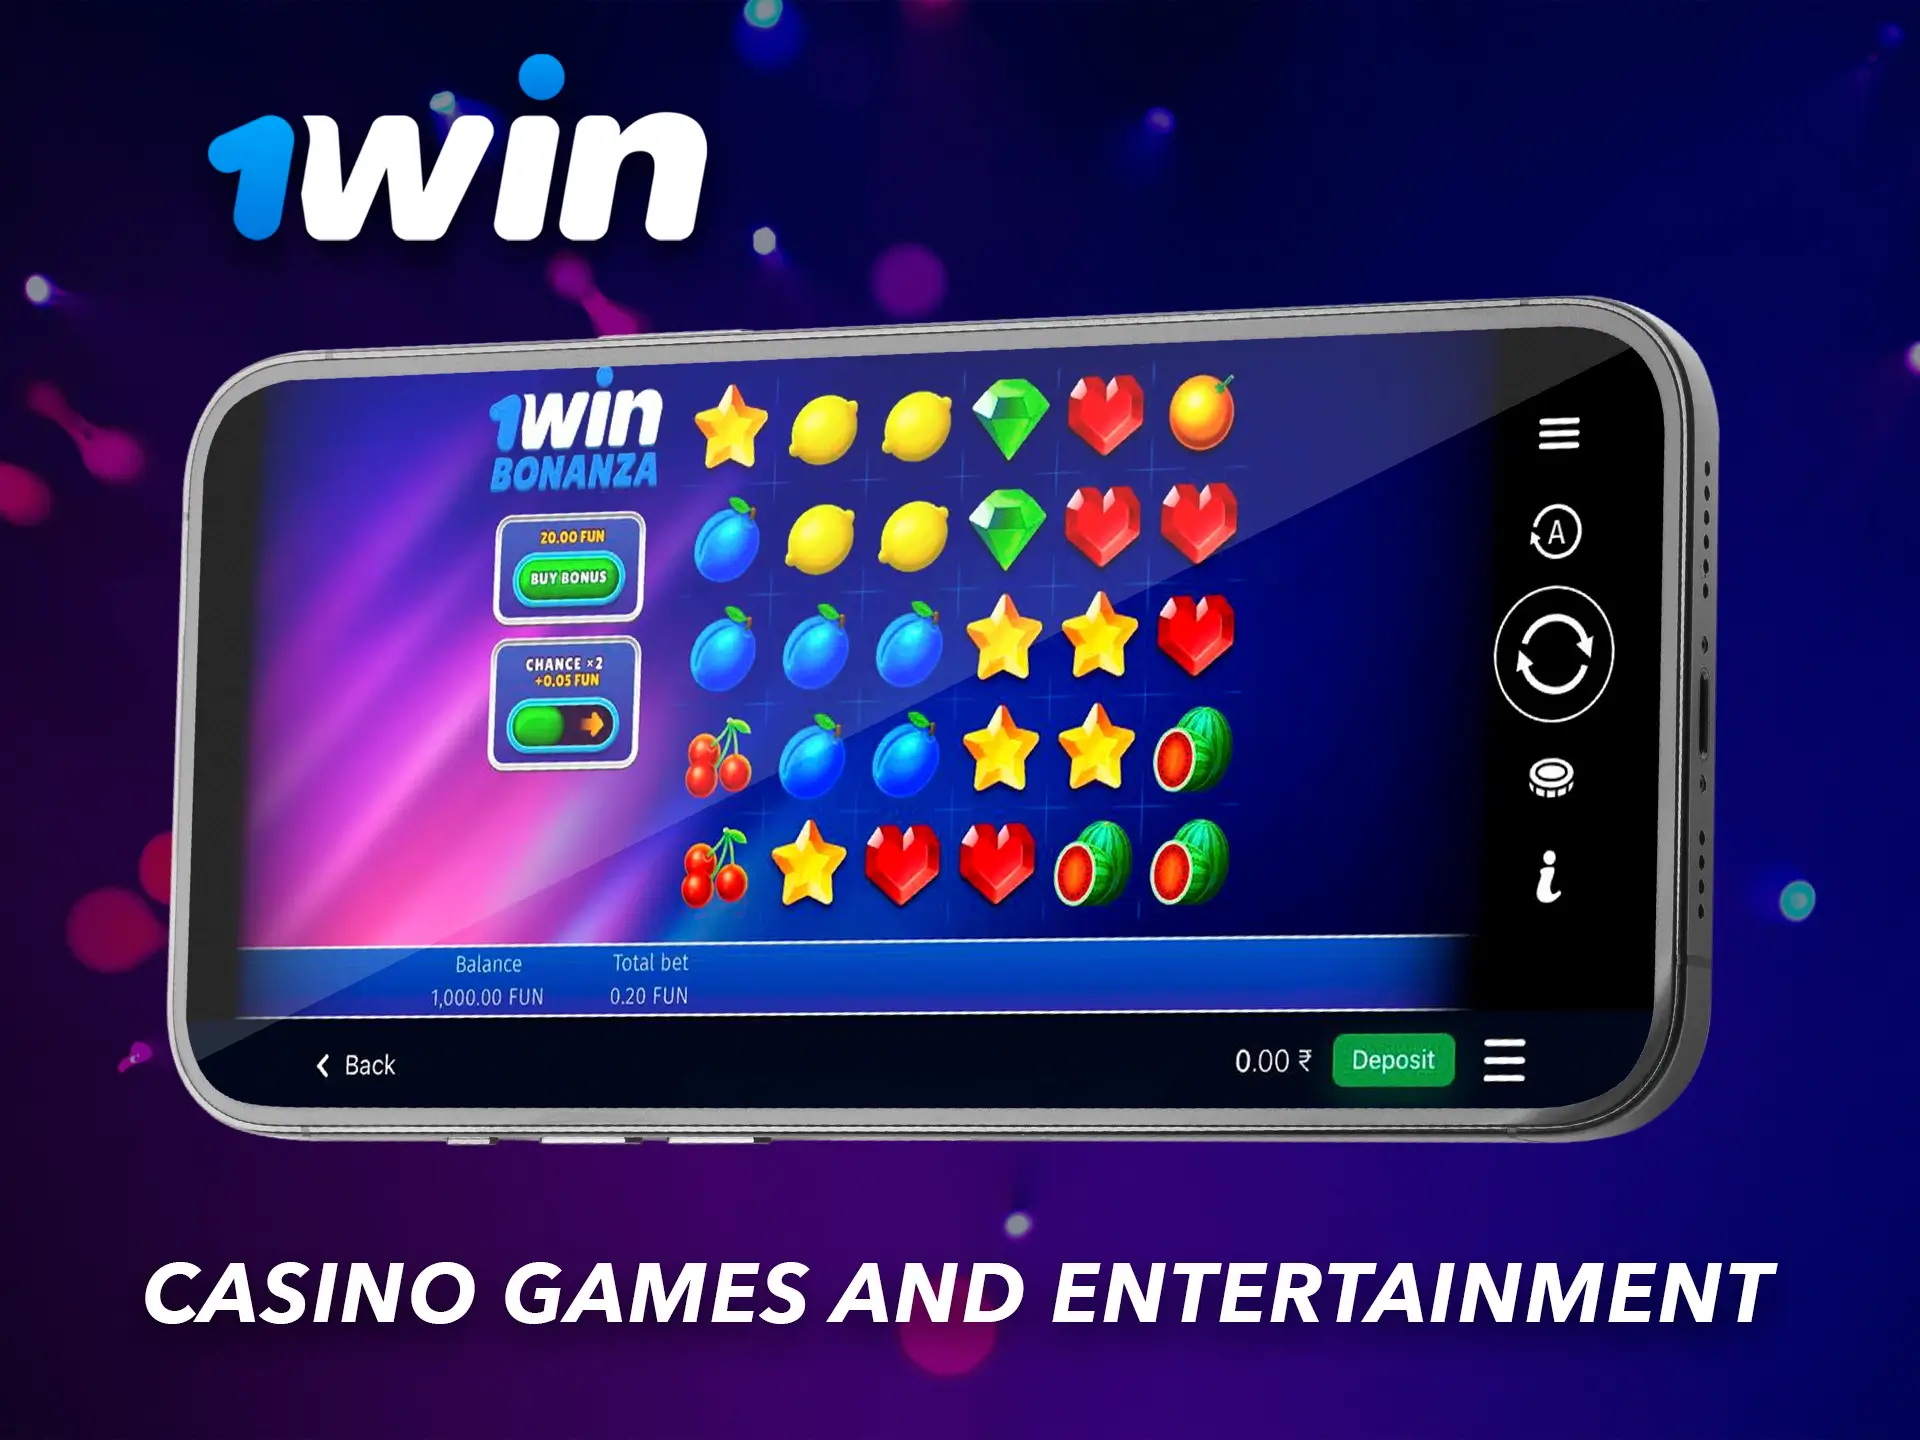 The variety of games and big jackpots from 1Win gives all players the opportunity to get a charge of emotions and drive.